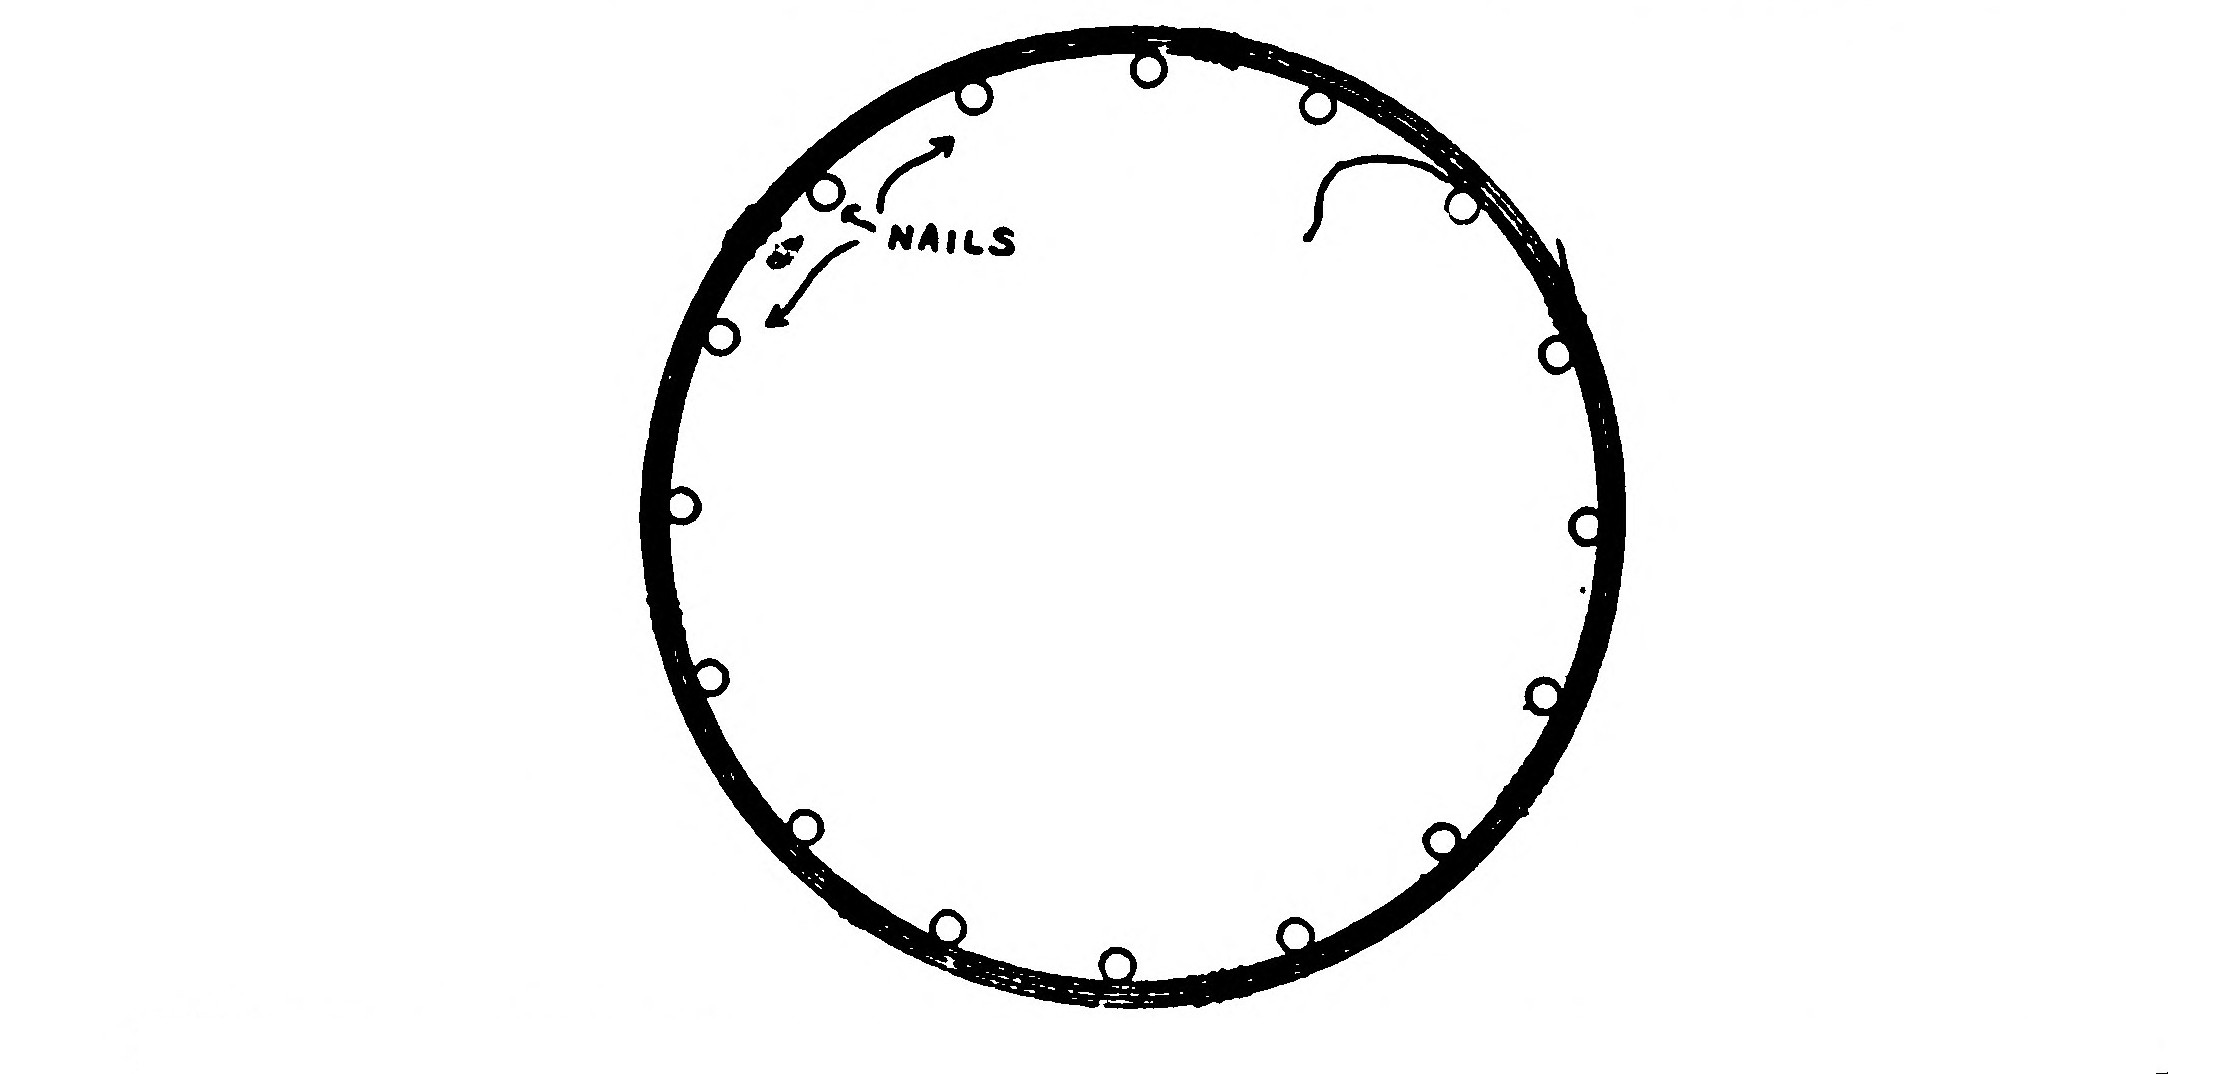 FIG. 183.—Showing how the Coils may be formed by winding around nails set in a circle in the Floor.